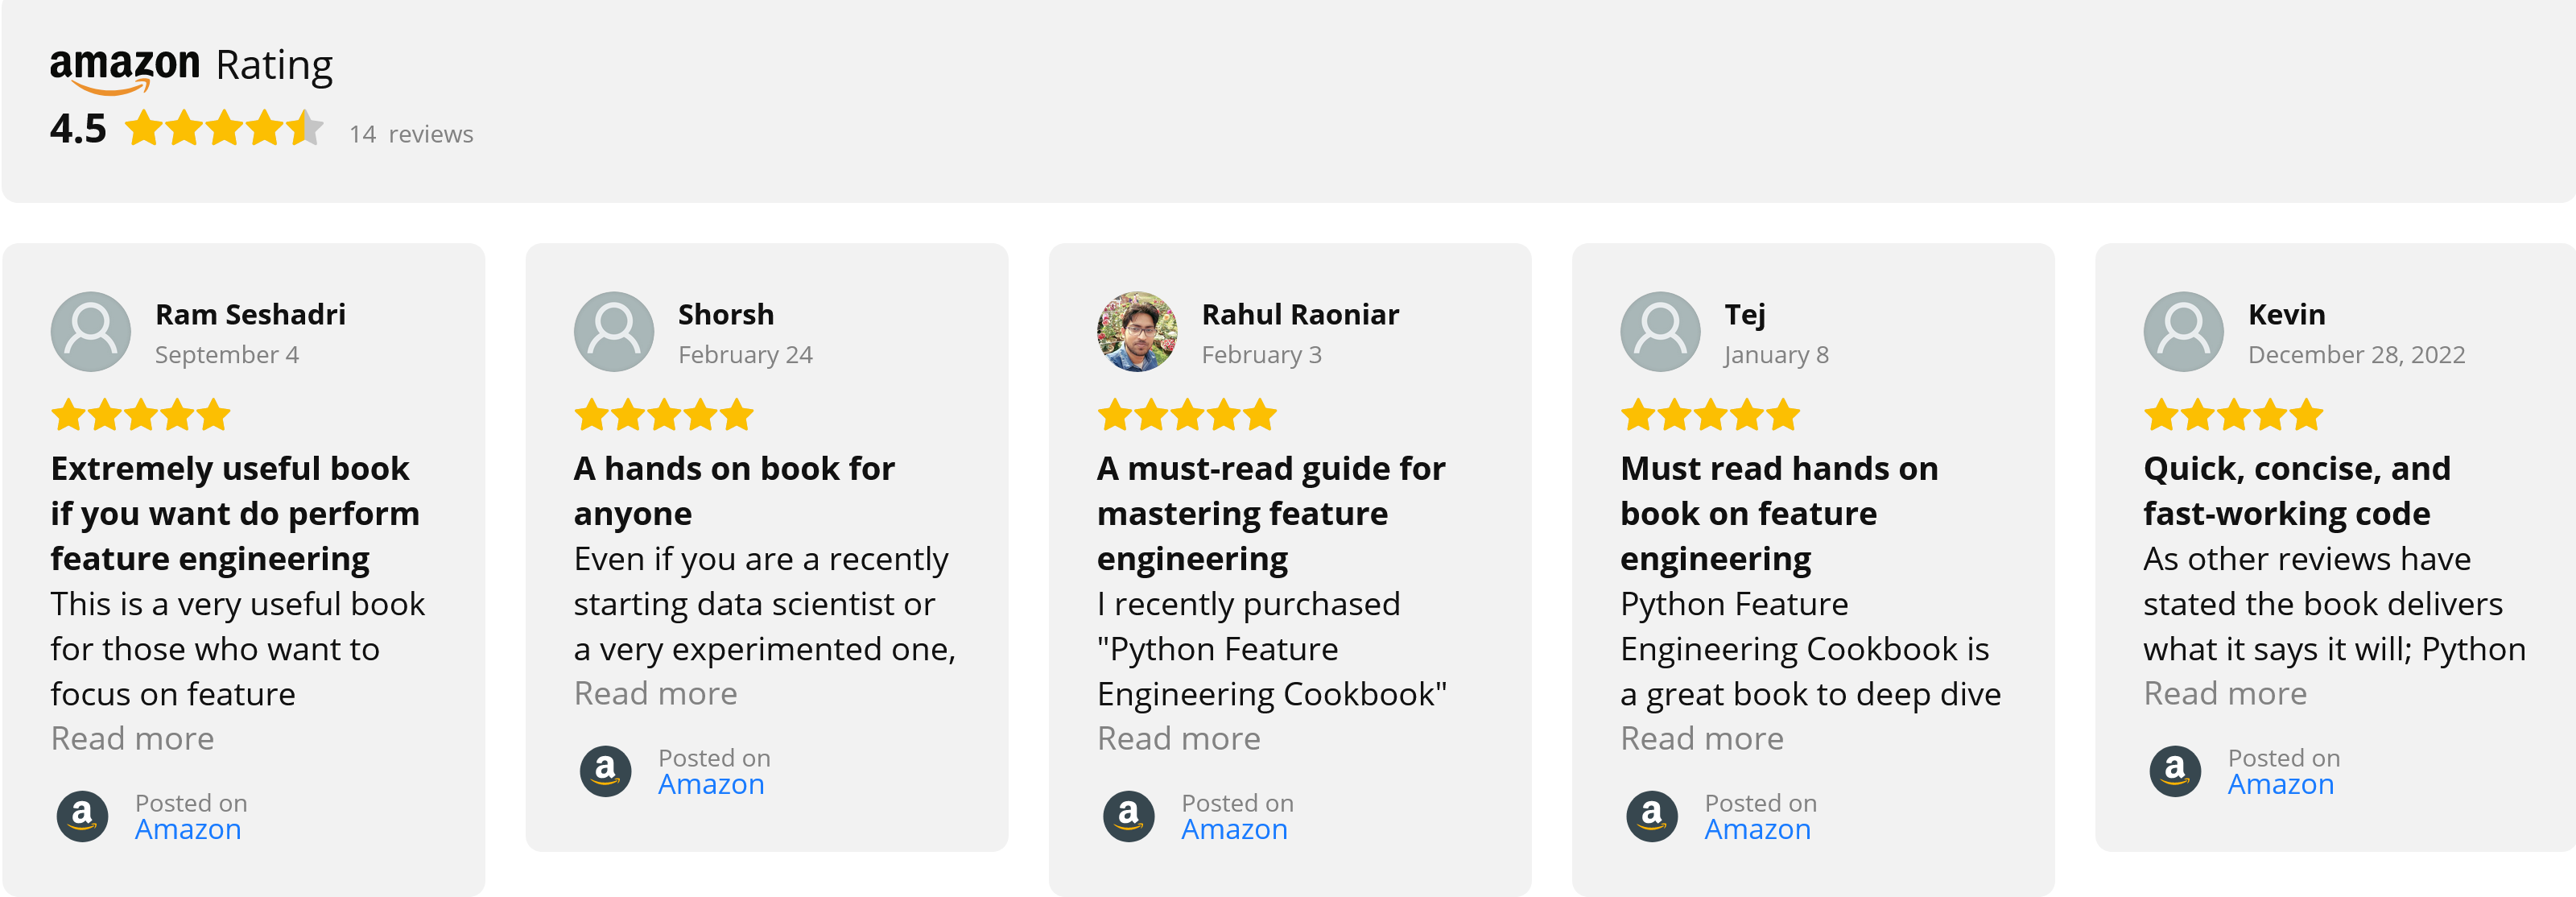 Customer reviews on Amazon for the Python Feature Engineering Cookbook